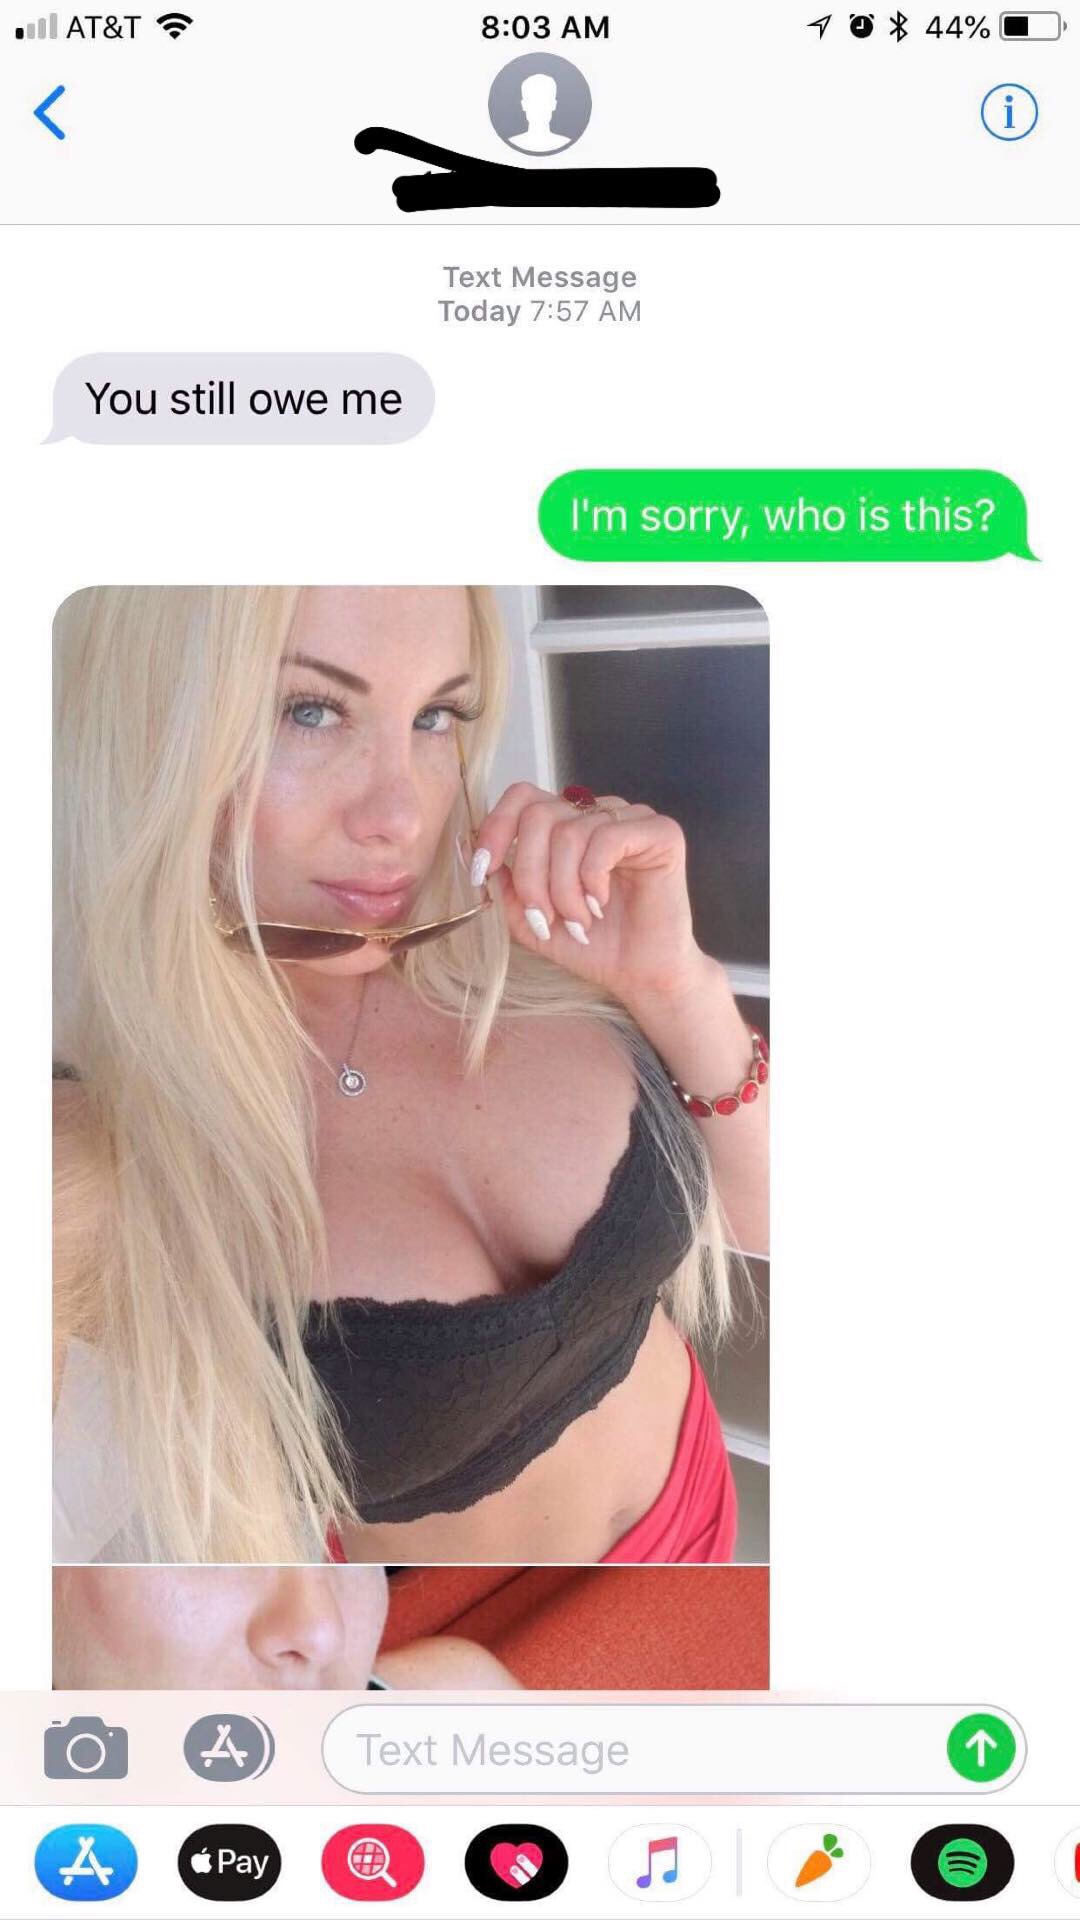 Gold Digger Tries To Threaten Her Sugar Daddy But Texts The Wrong Number